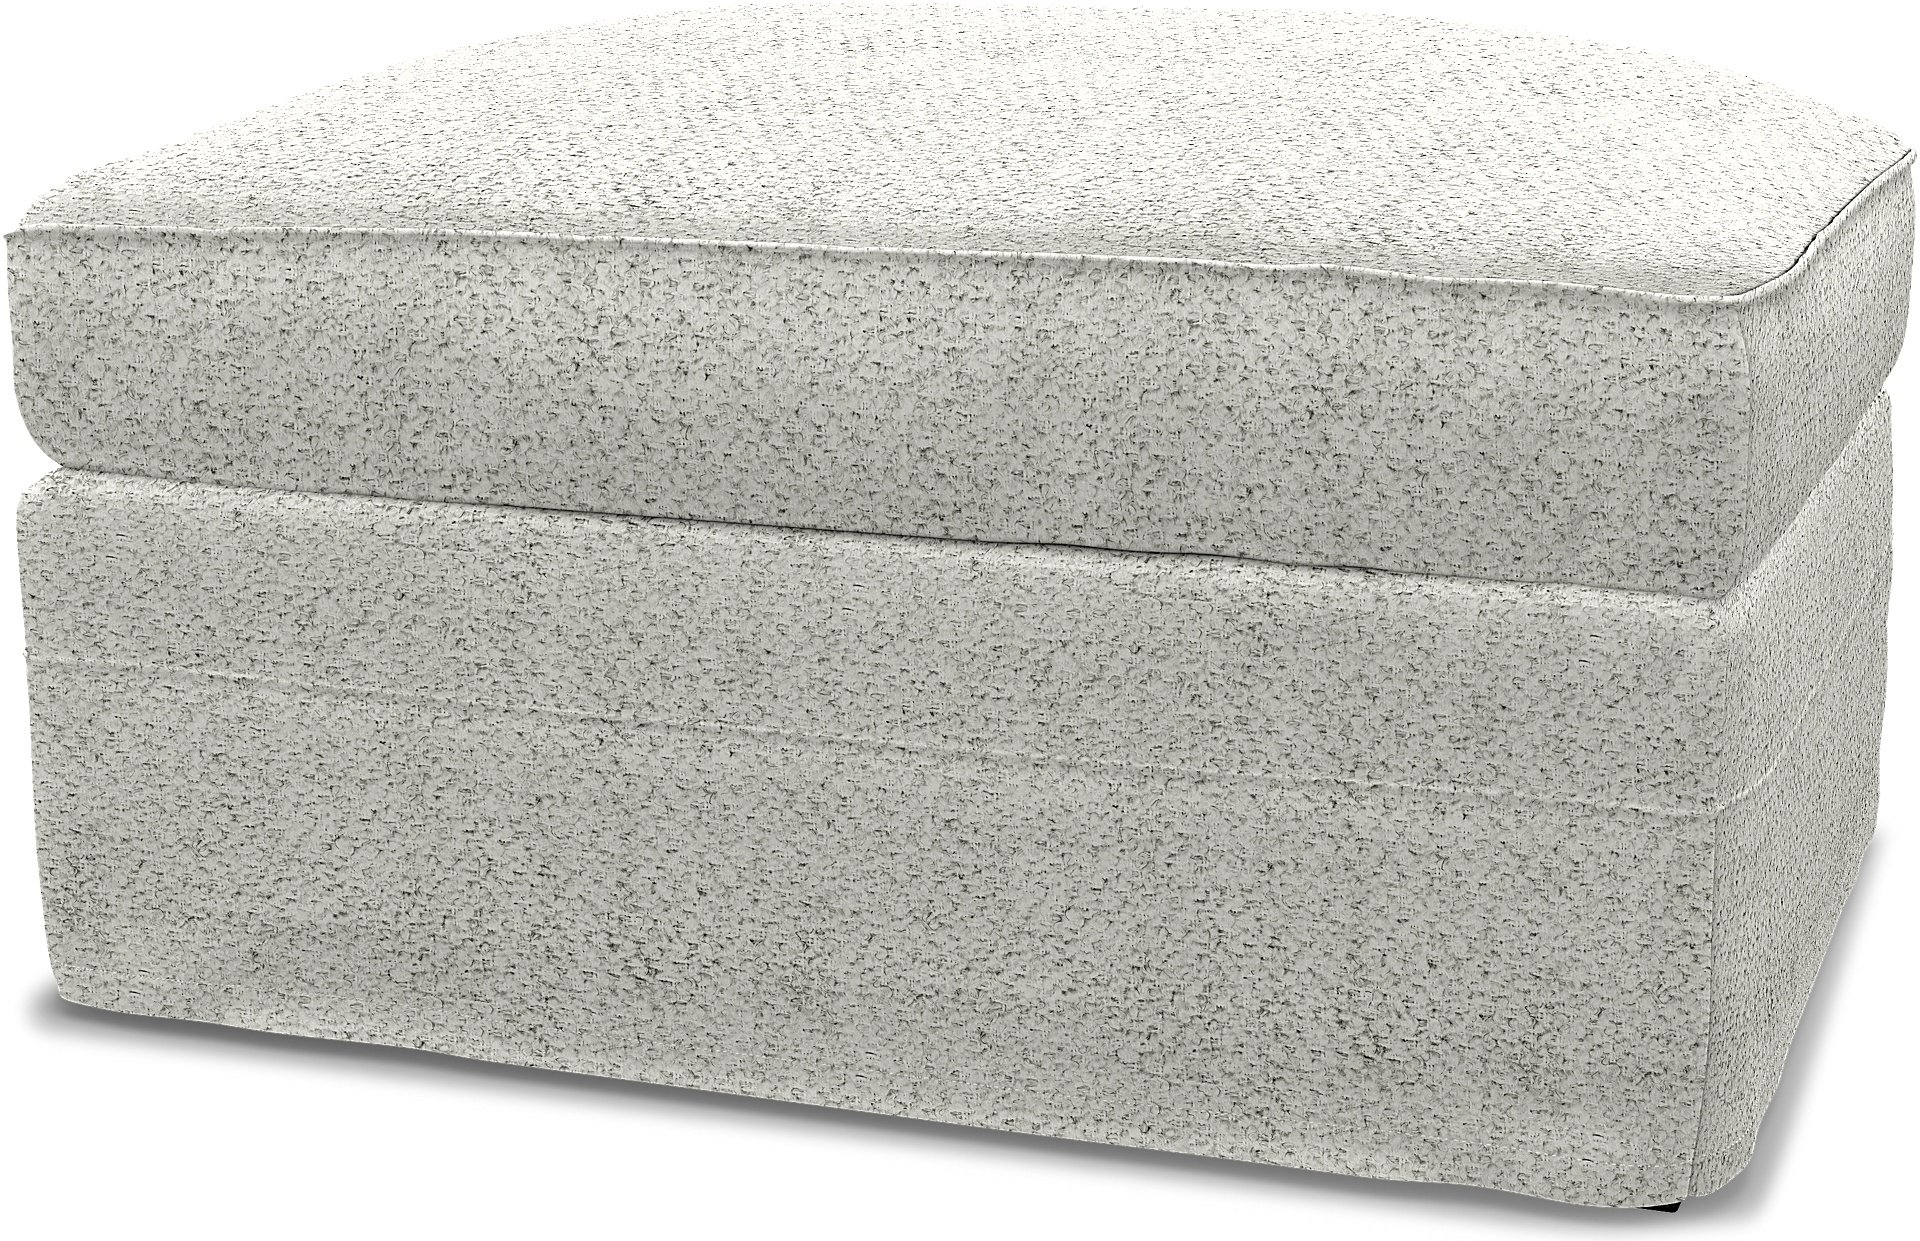 IKEA - Gronlid Footstool with Storage Cover, Ivory, Boucle & Texture - Bemz